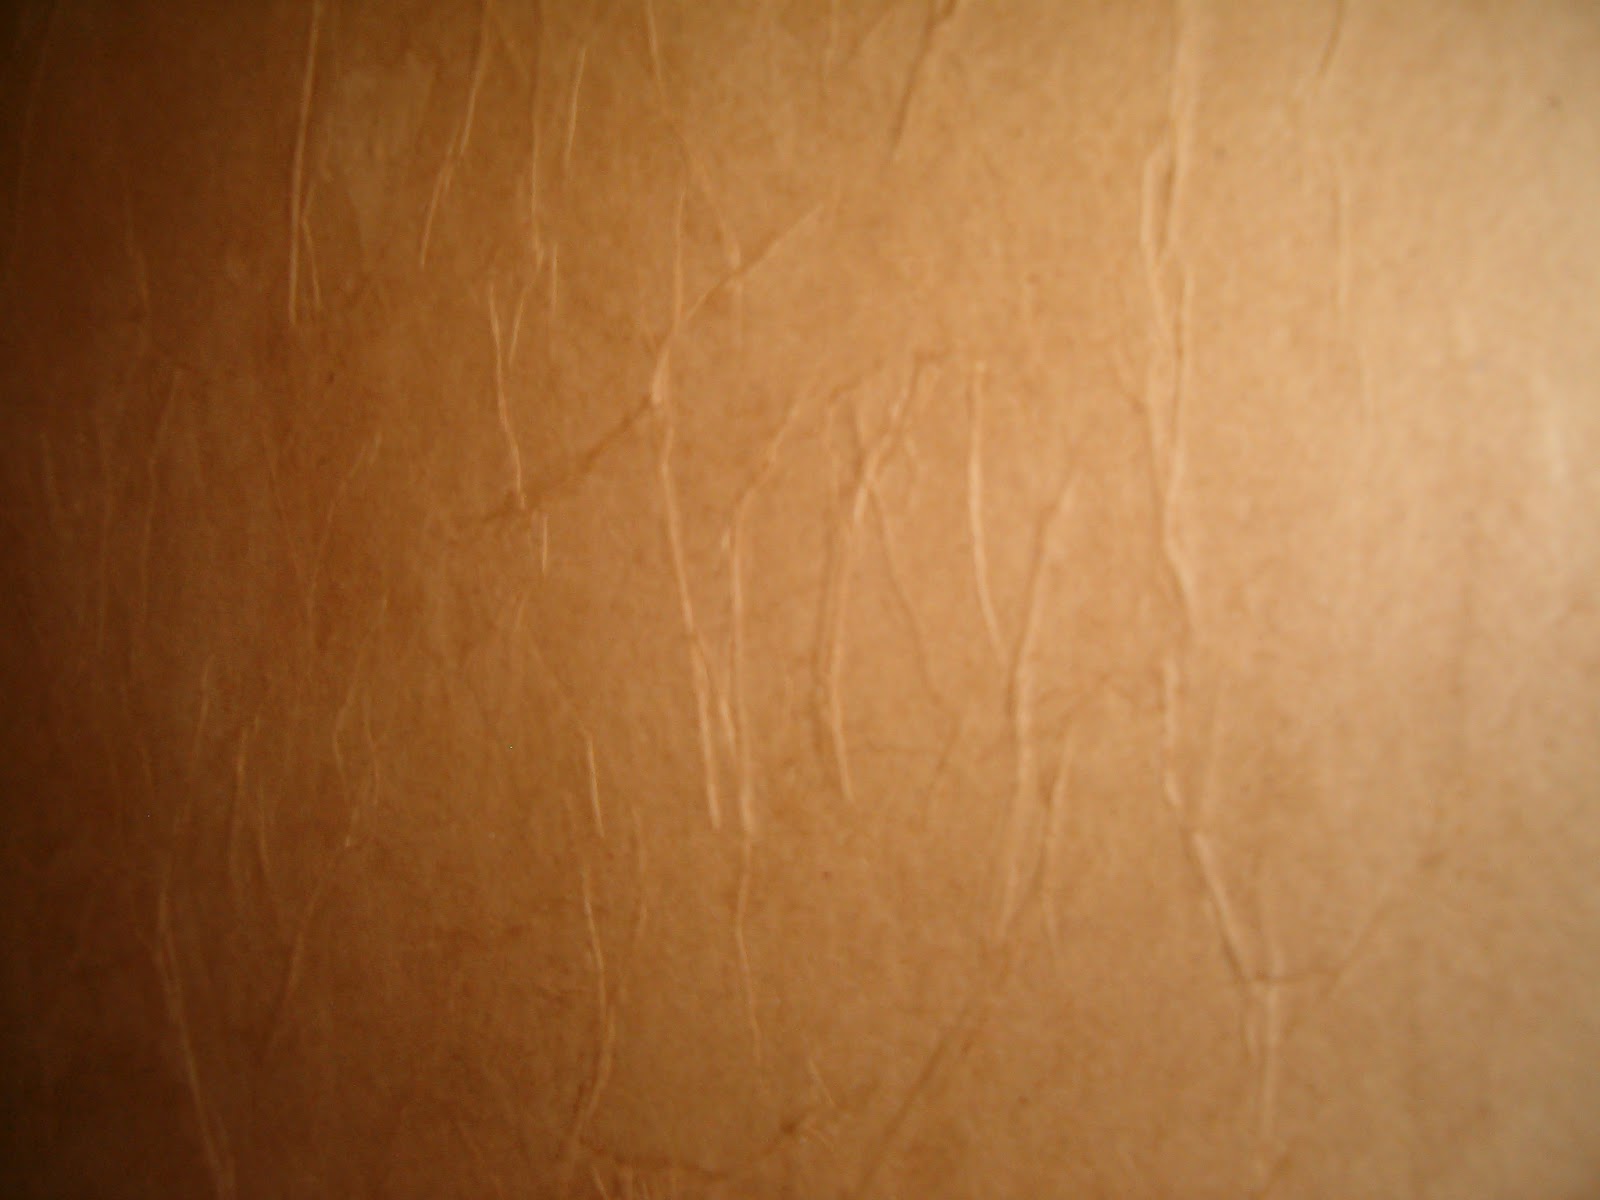 Redo Redux: Revisiting Past Projects: Paper Bag Wall